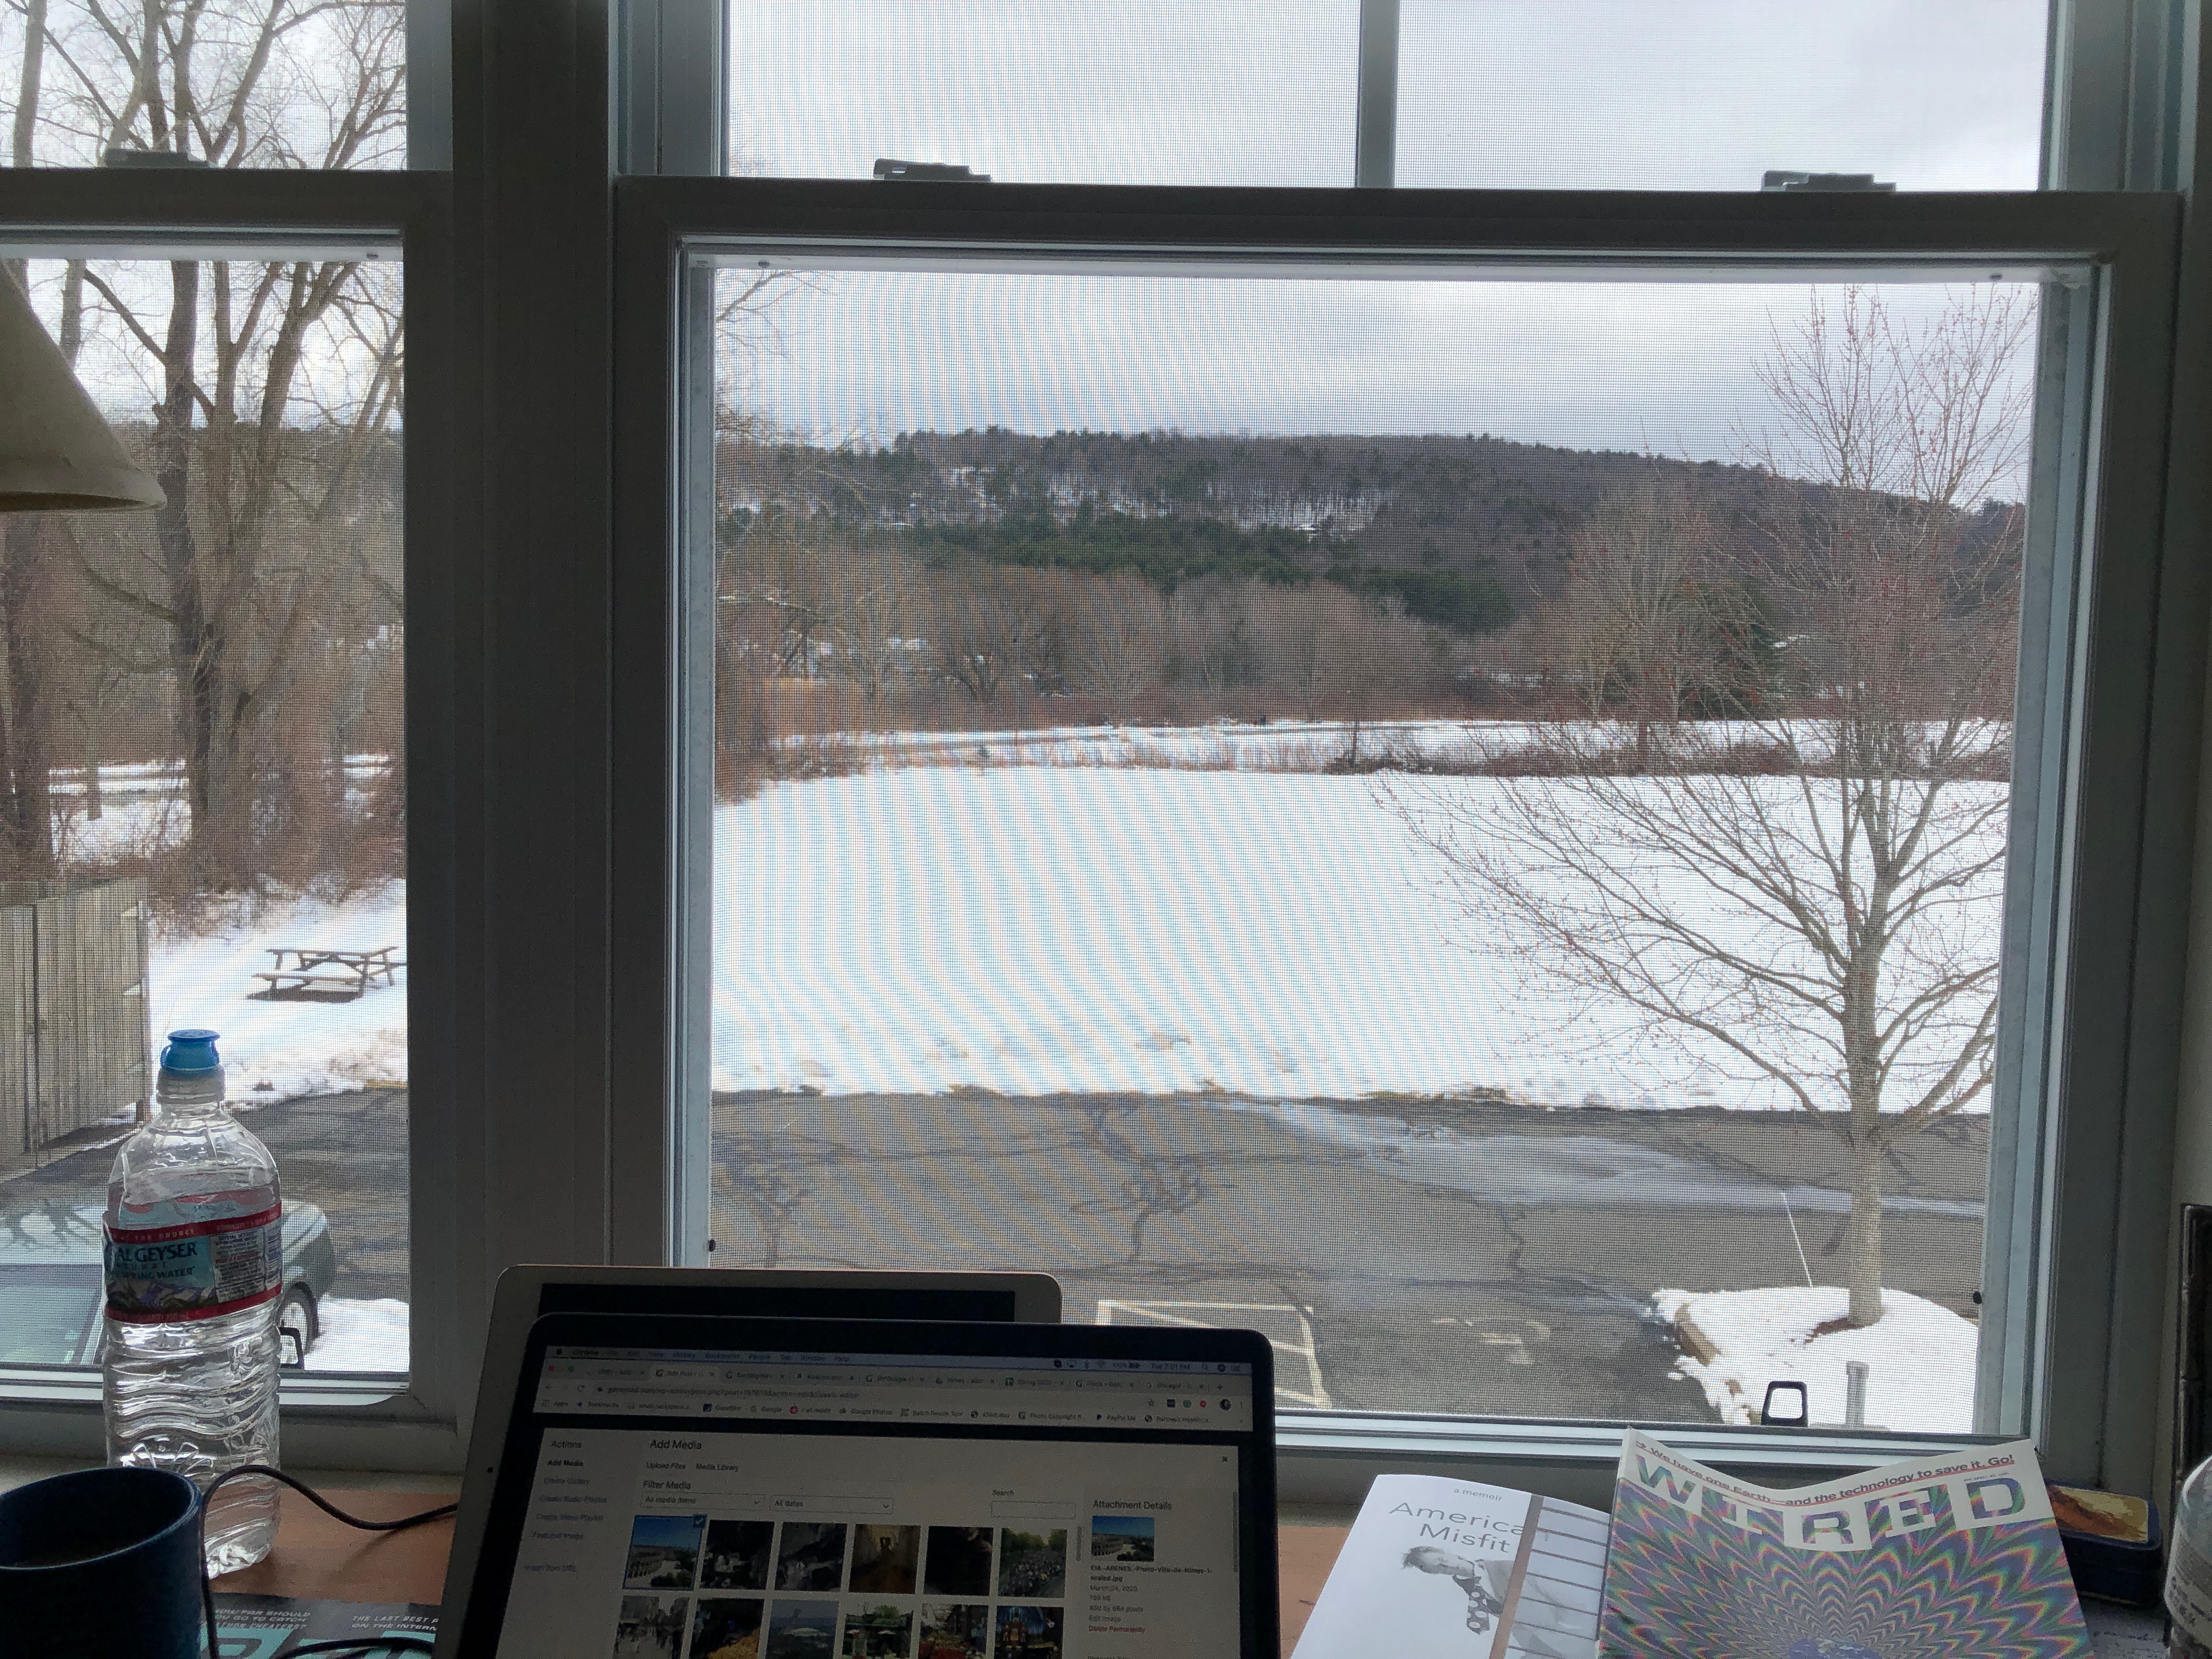 My temporary office view at my partner Mary's house. Life in the lockdown. Nice view, huh?